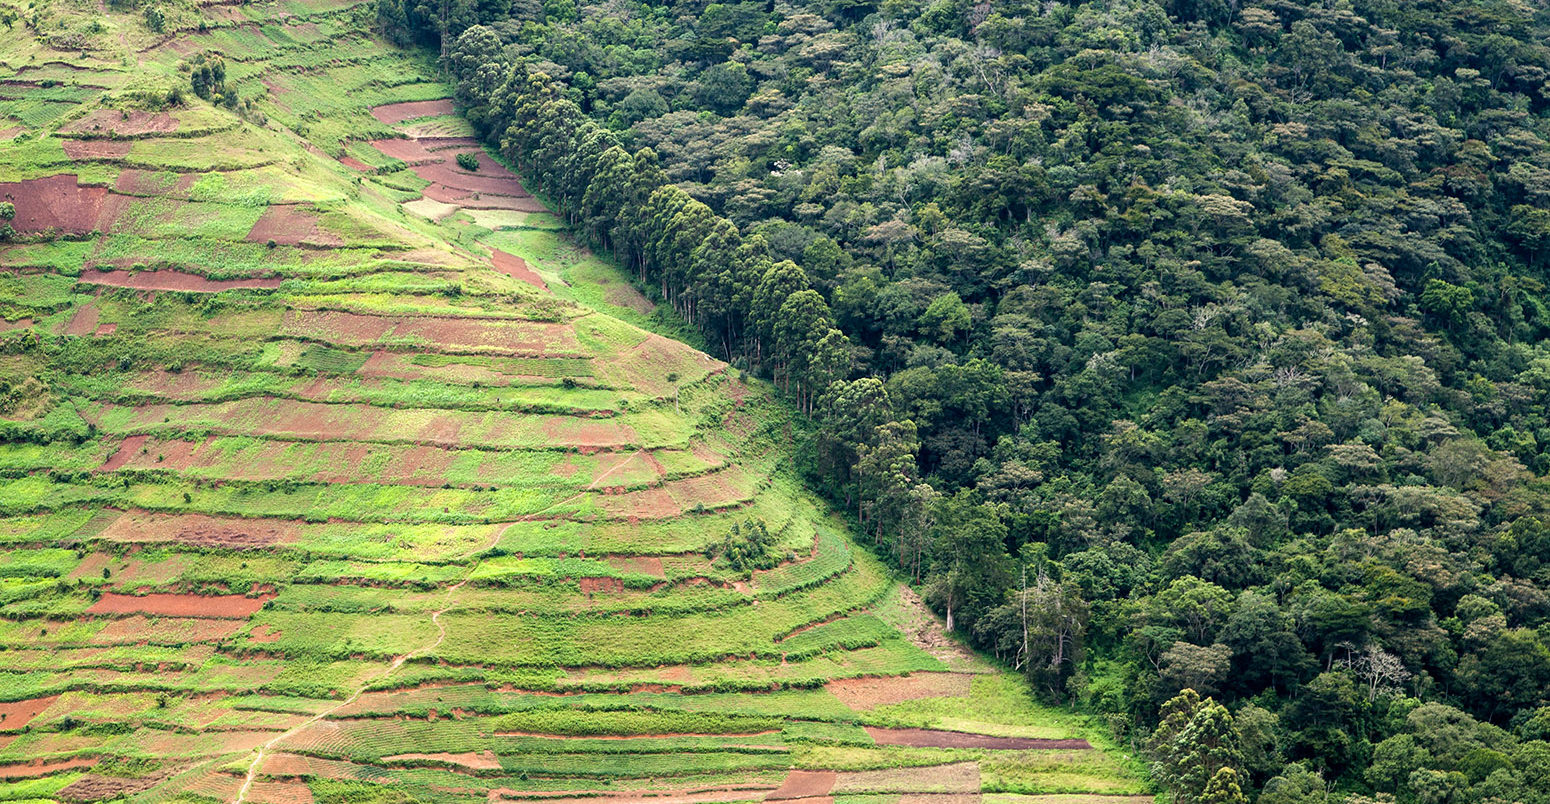 Deforestation for agriculture along border of Bwindi Impenetrable Forest NP, Uganda. Credit: Nature Picture Library / Alamy Stock Photo. K2EEGM